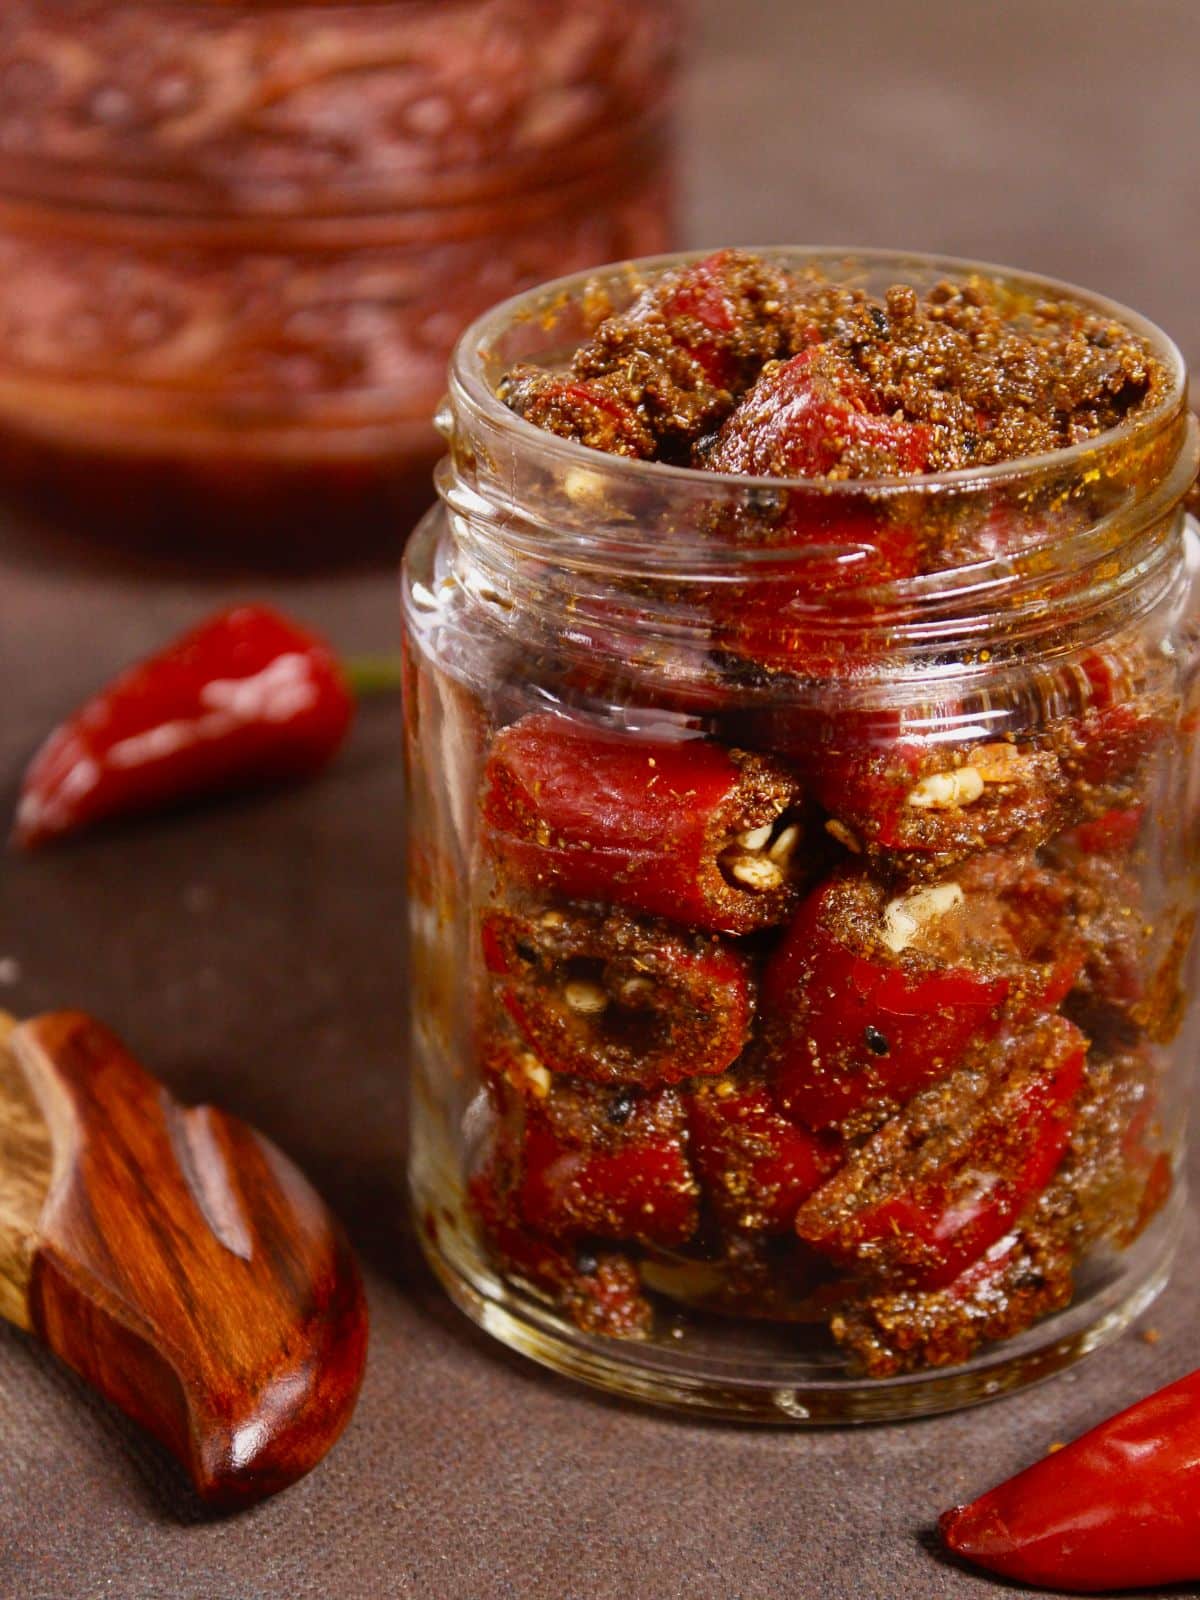 long view of side image of instant red chili pickle